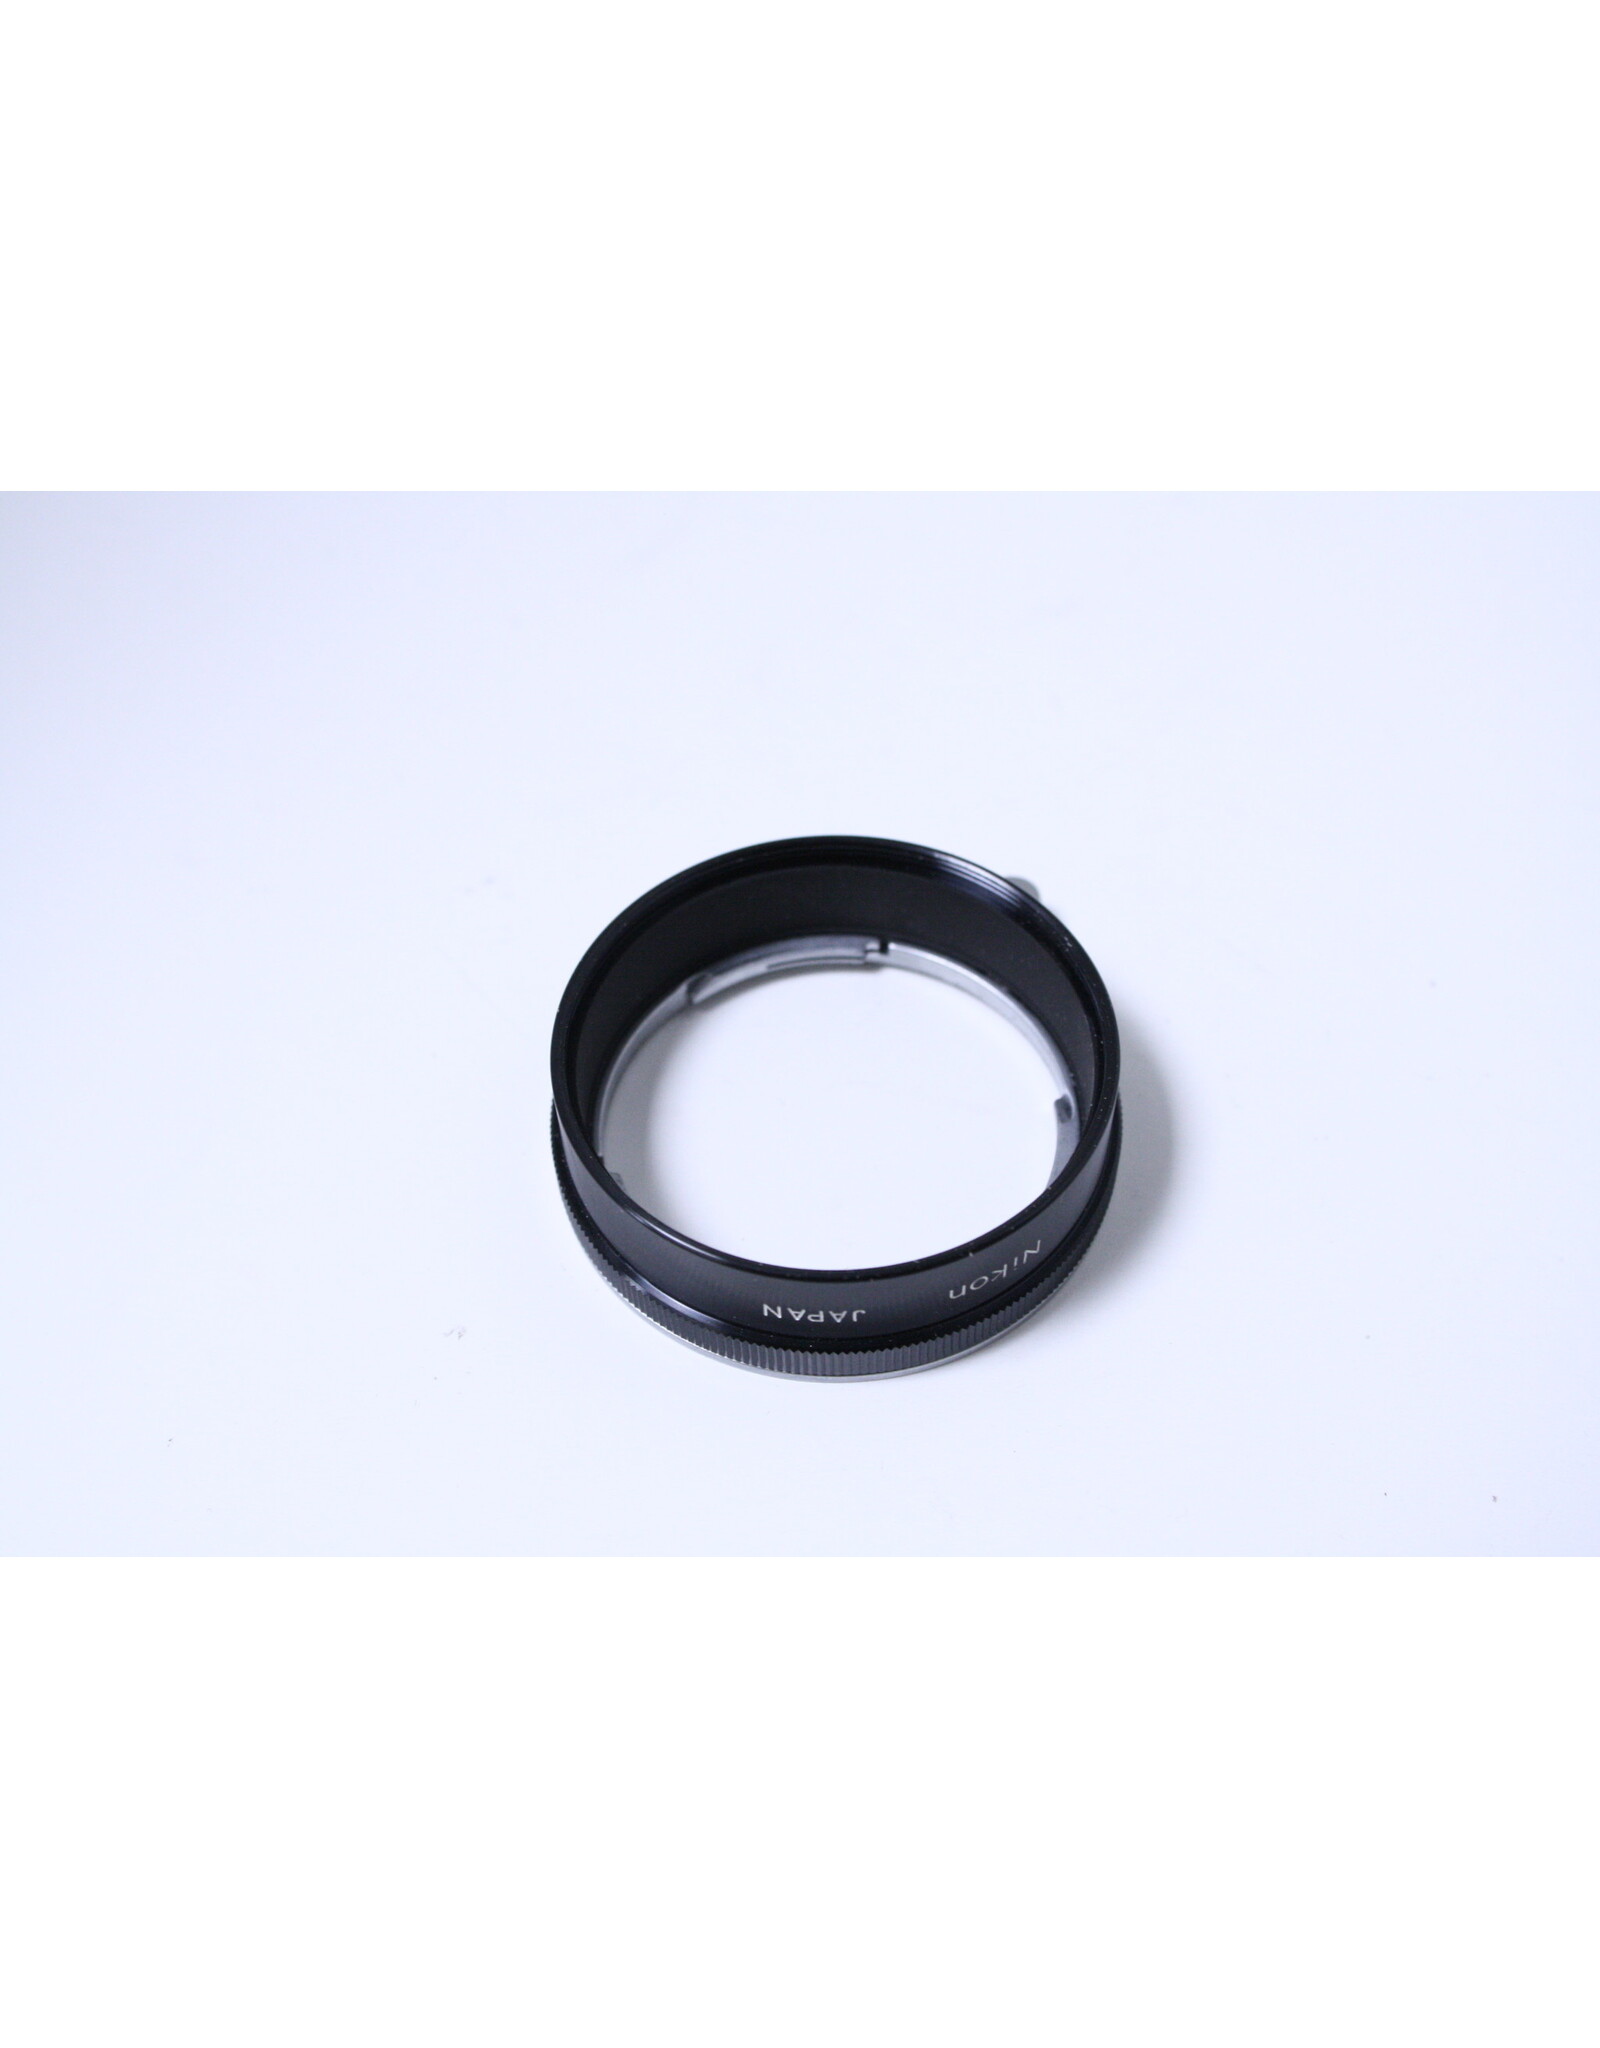 Nikon BR-3 Macro Adapter Ring for Bellows Focusing Attachment Model 2 (Pre-owned)